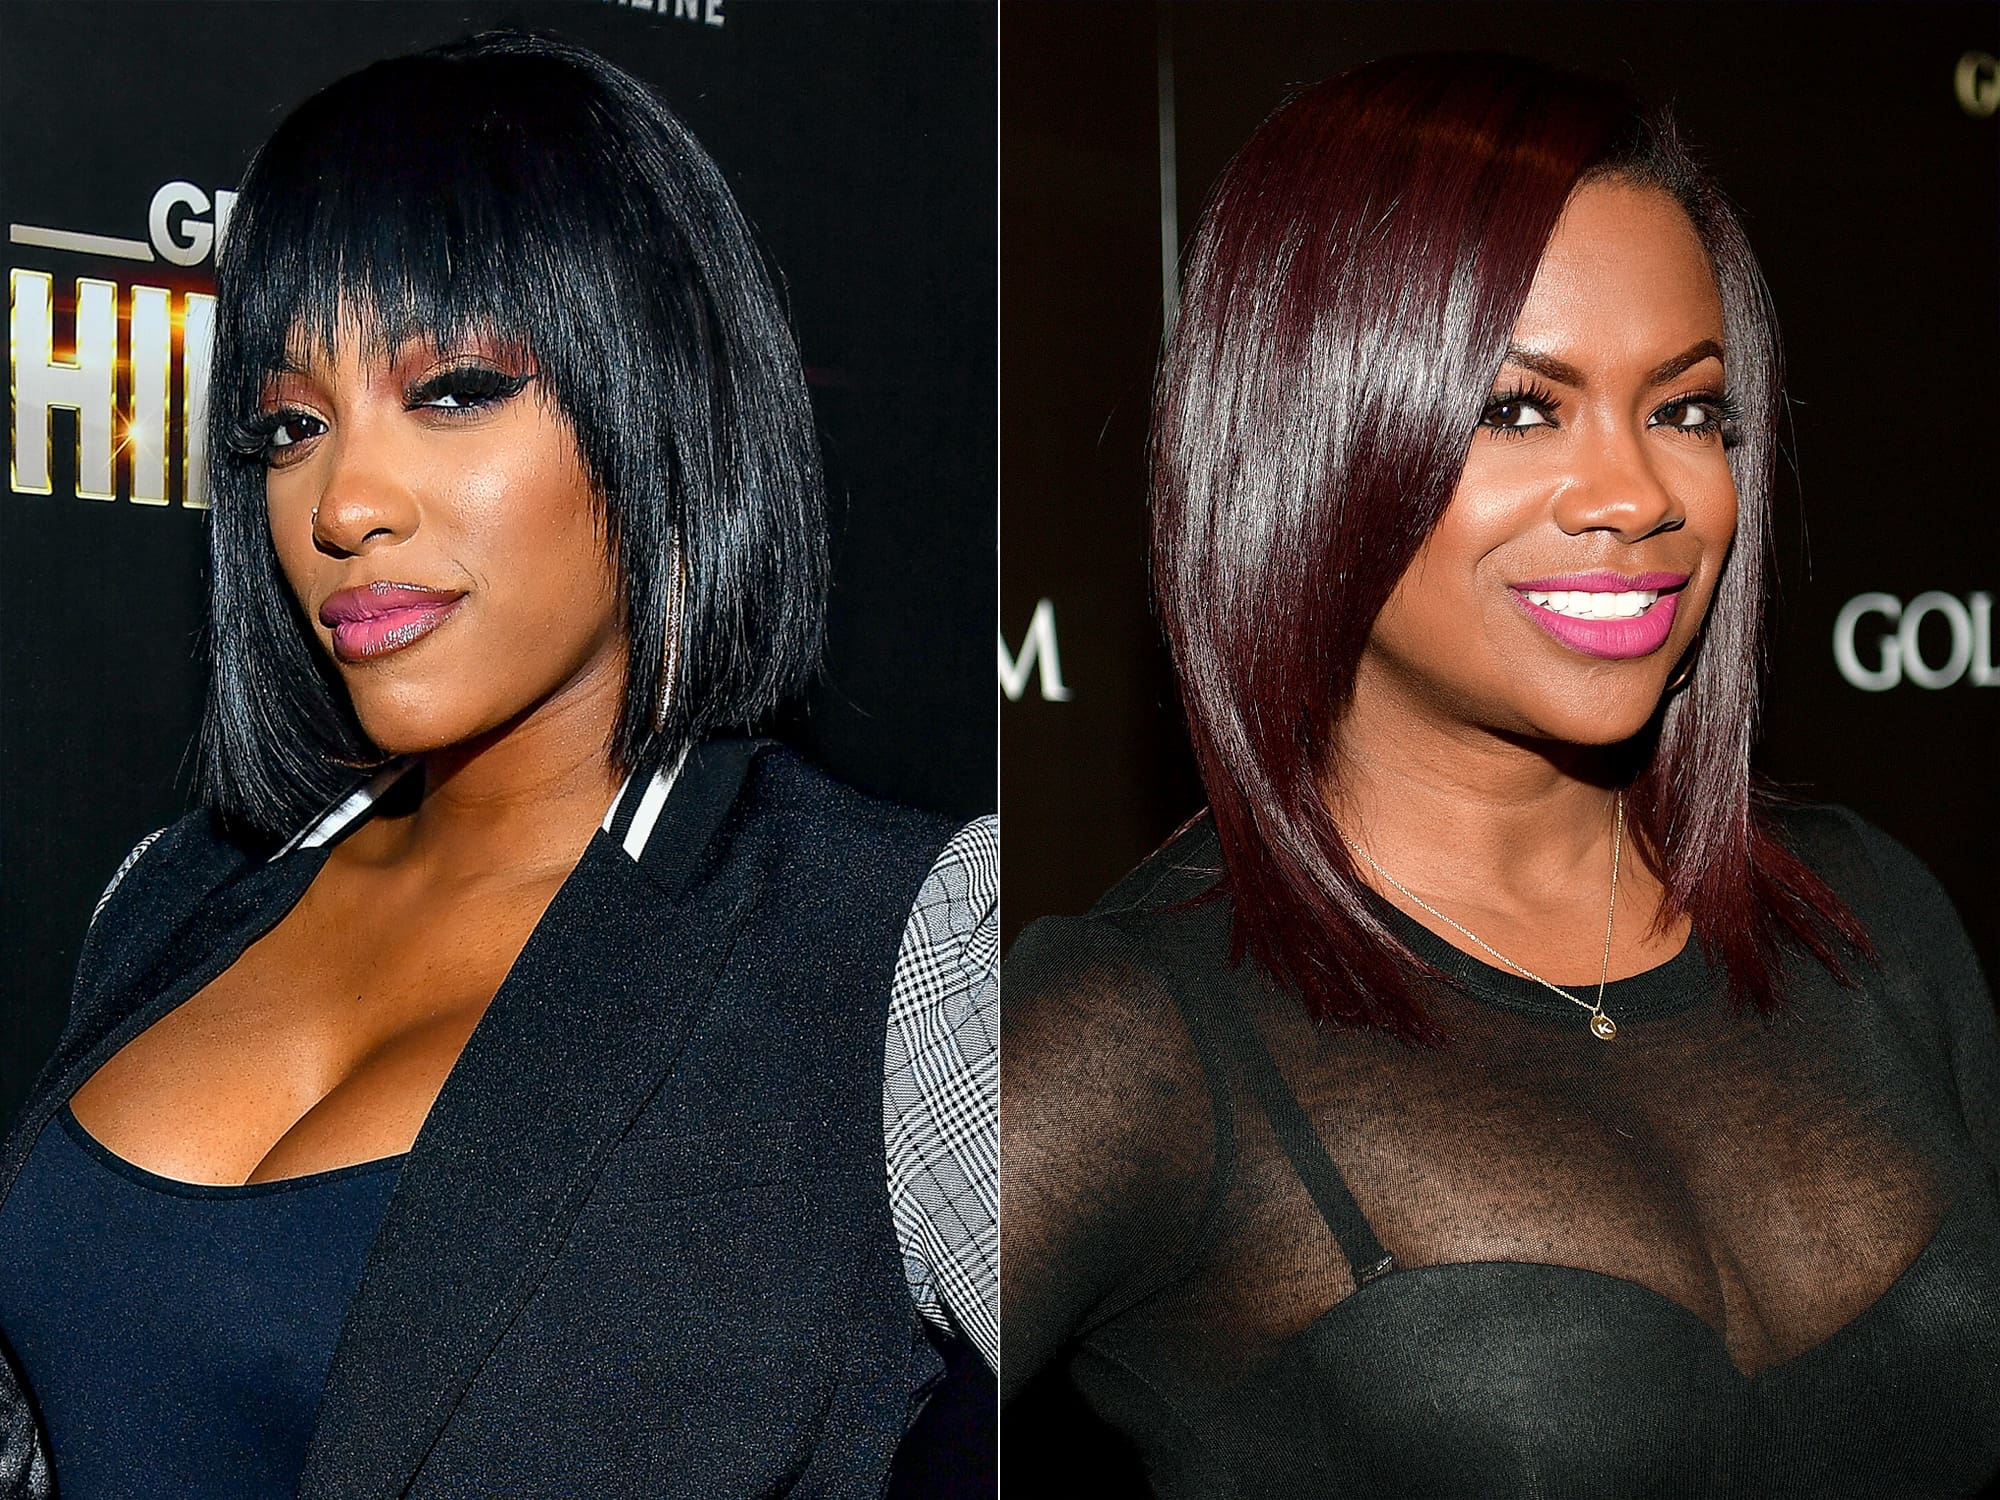 Porsha Williams Hangs Out With Kandi Burruss And Fans Could Not Be Happier